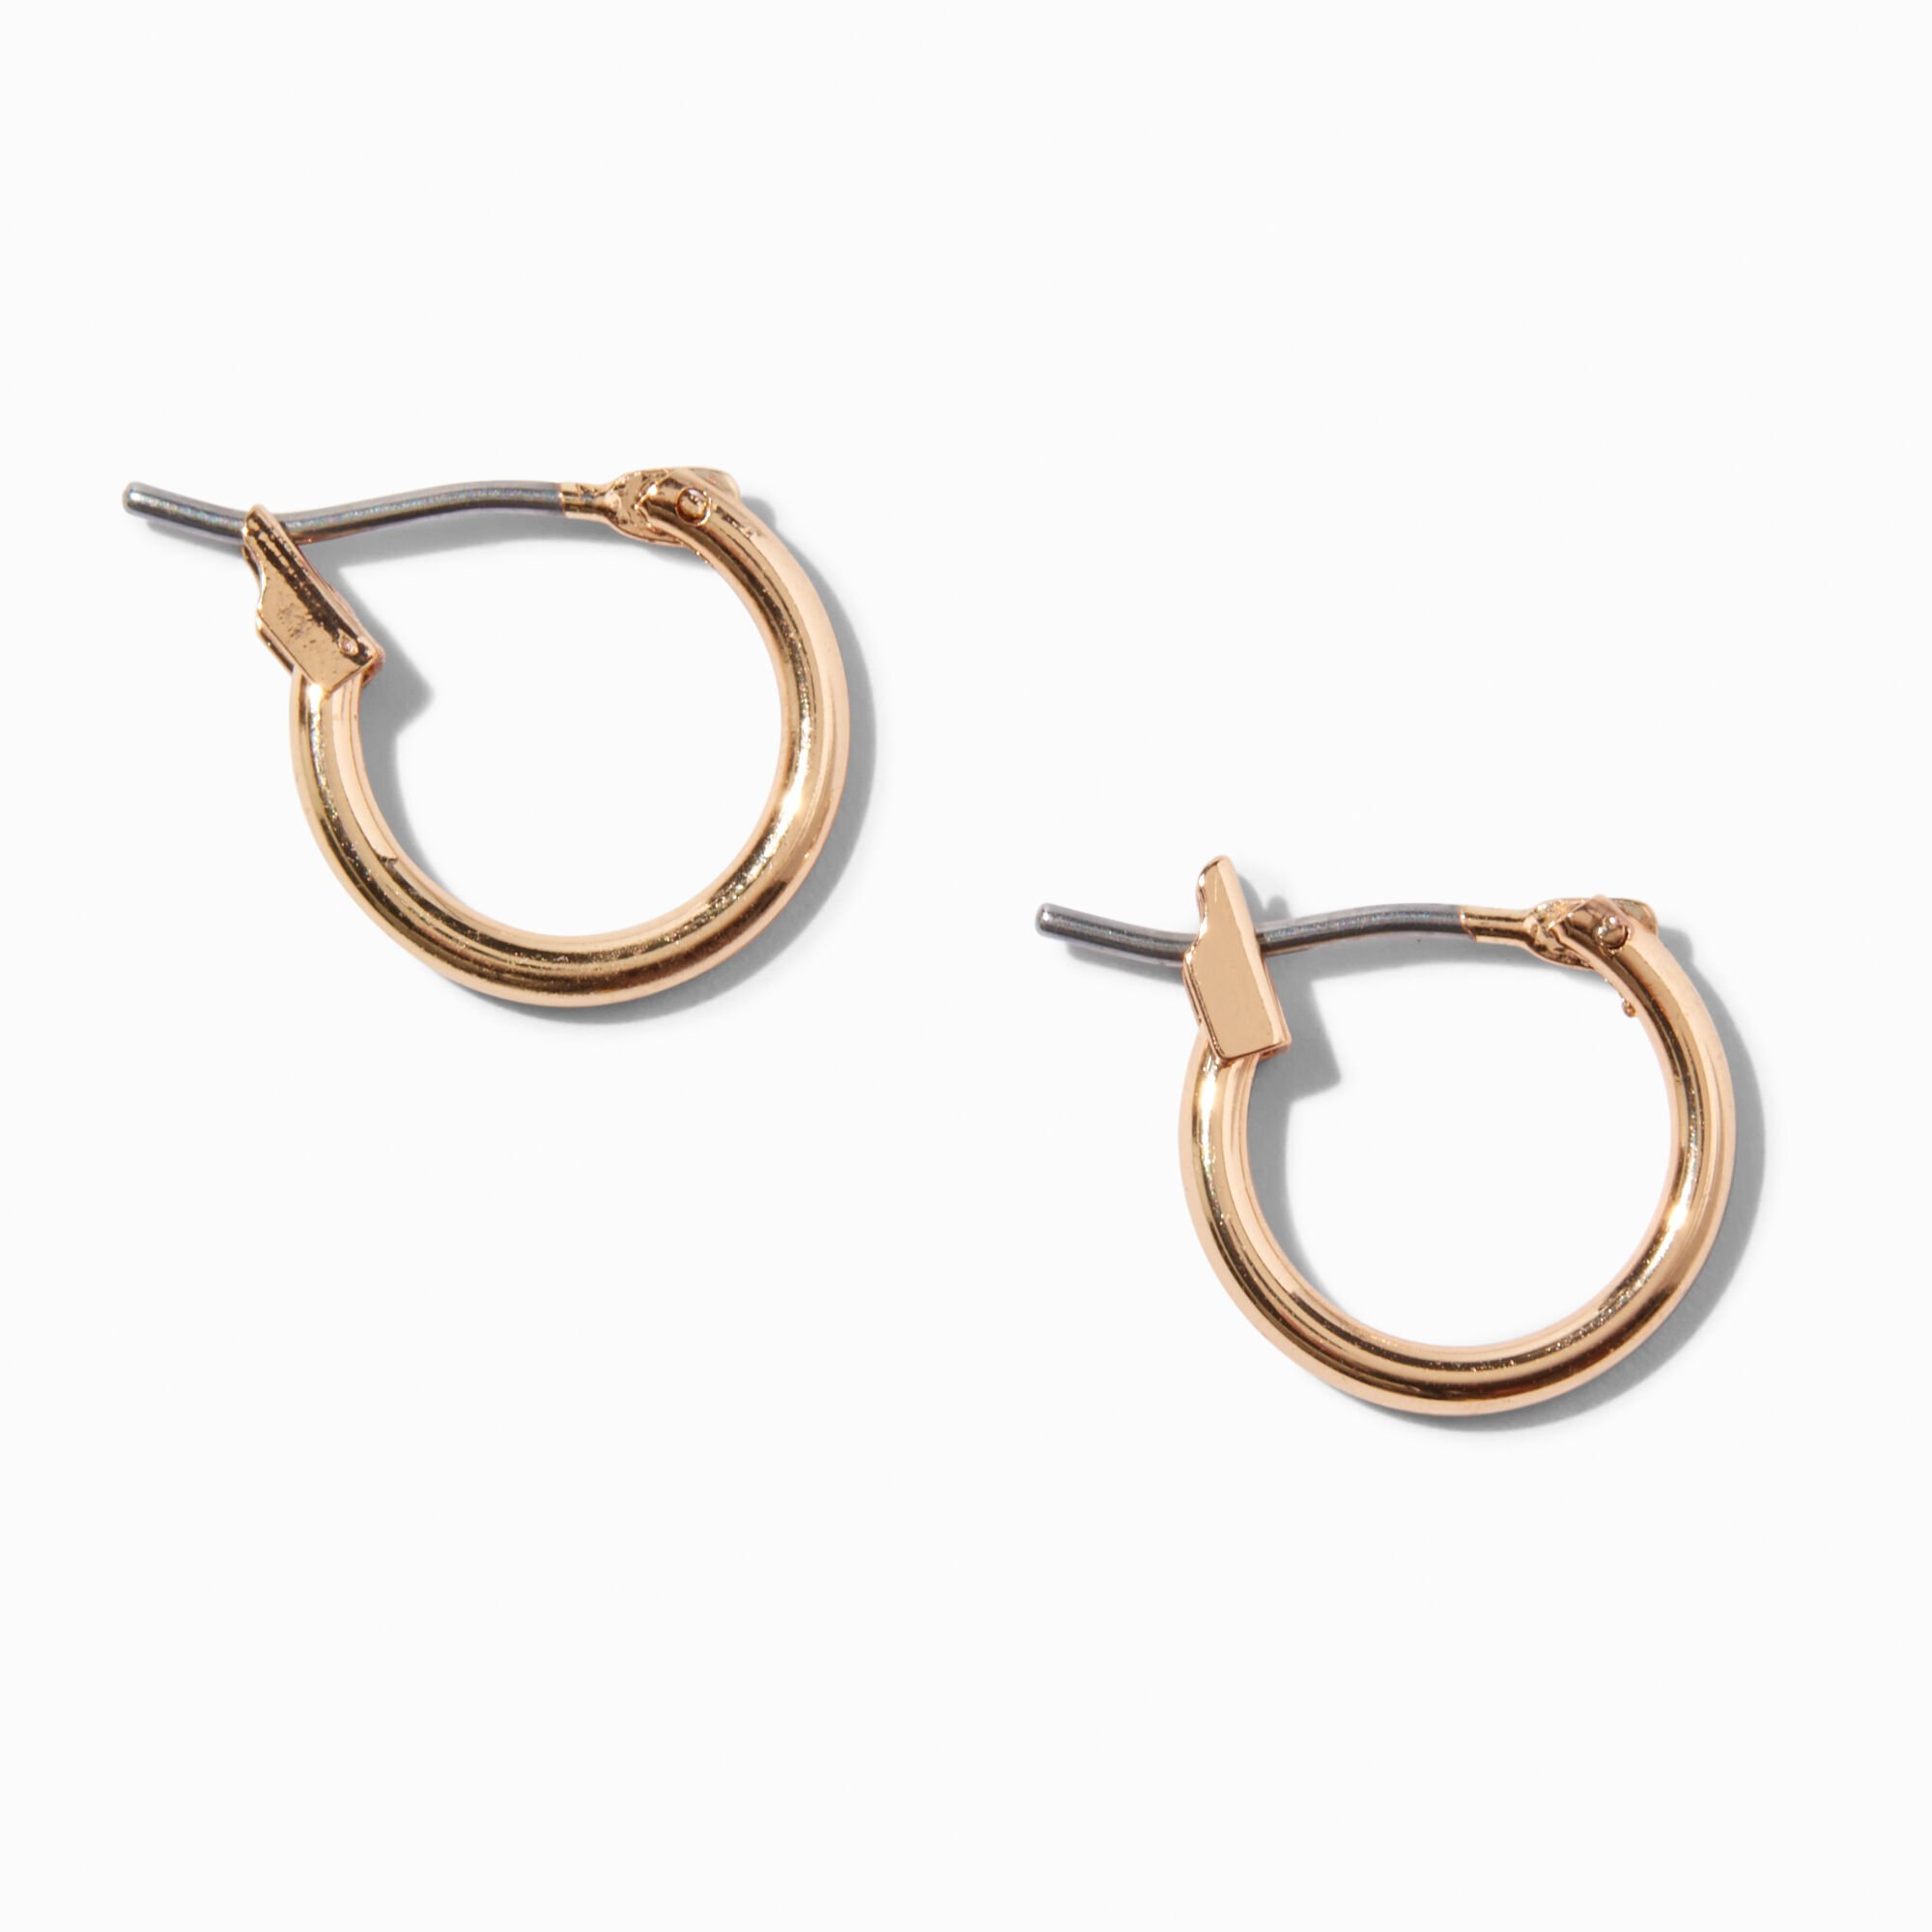 View Claires Tone 10MM Hoop Earrings Gold information